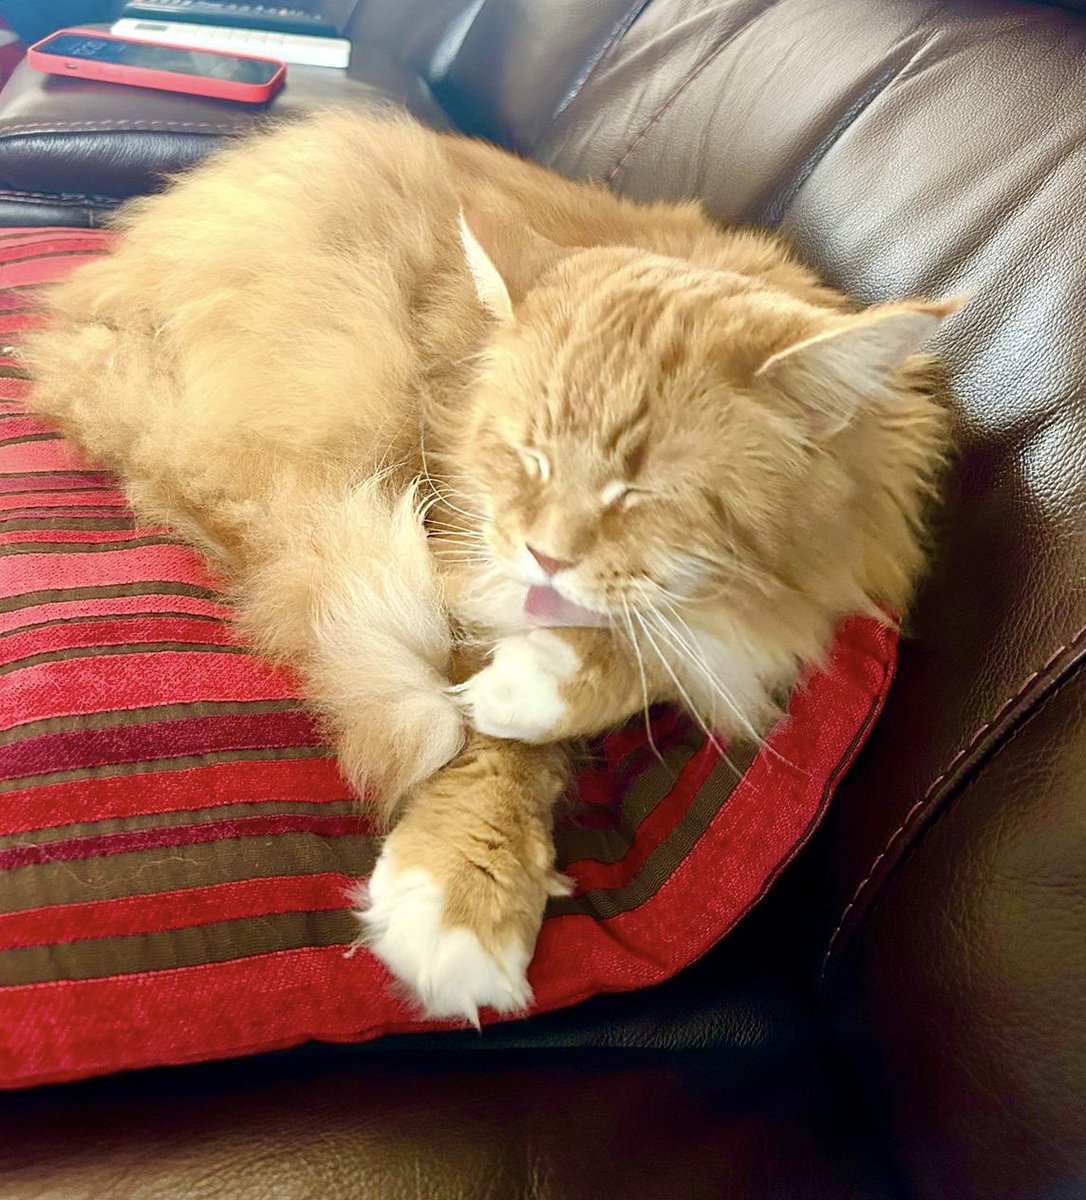 A tiny sliver of tongue on display from Buddy as he enters hour 6 of his grooming session 😹😹🦁🦁 #tongueouttuesday #teamfloof #CatsOfTwitter